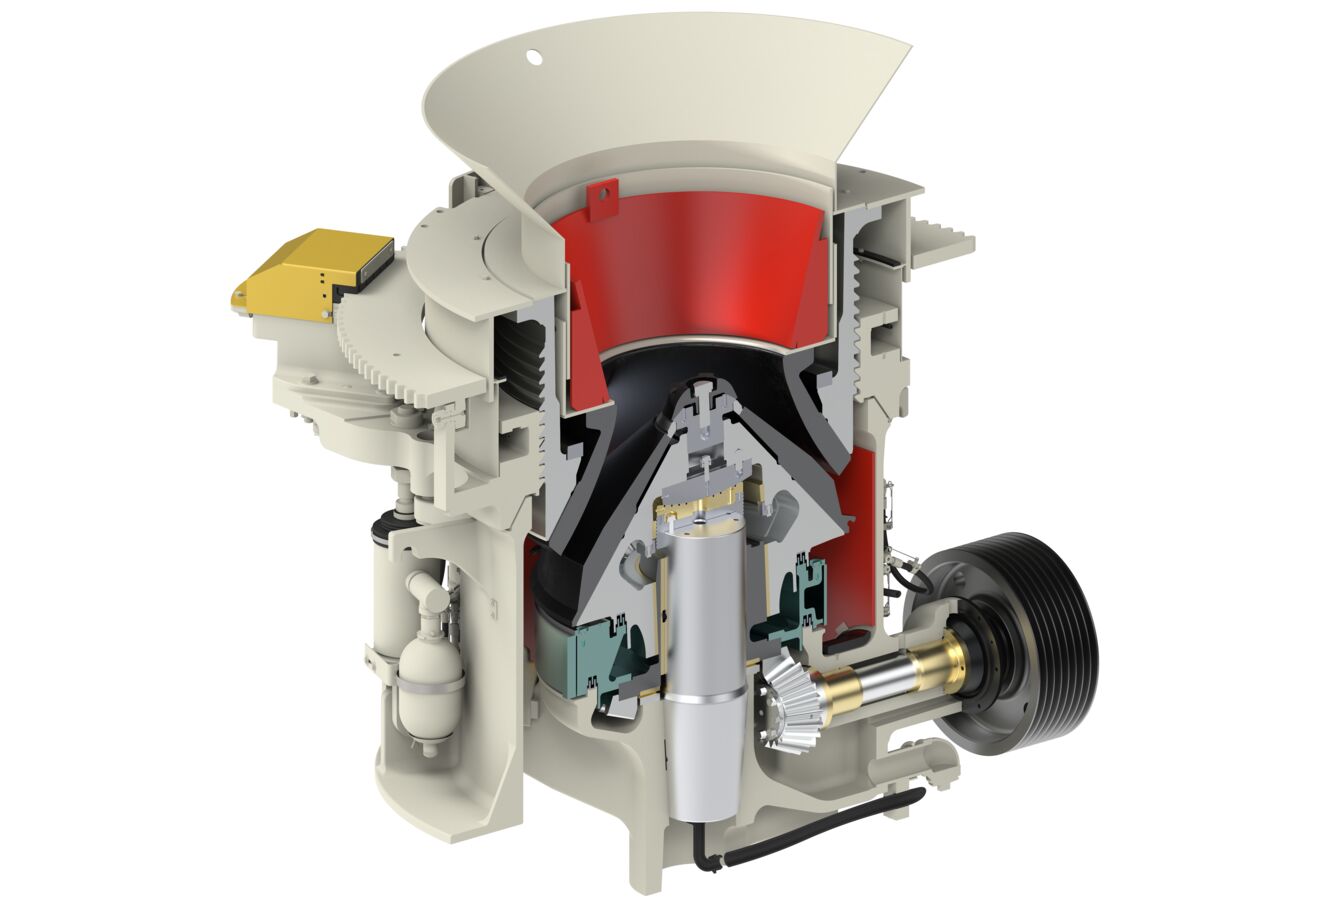 Nordberg® HP™ crushers feature a unique combination of crusher speed, throw, crushing forces and cavity design.